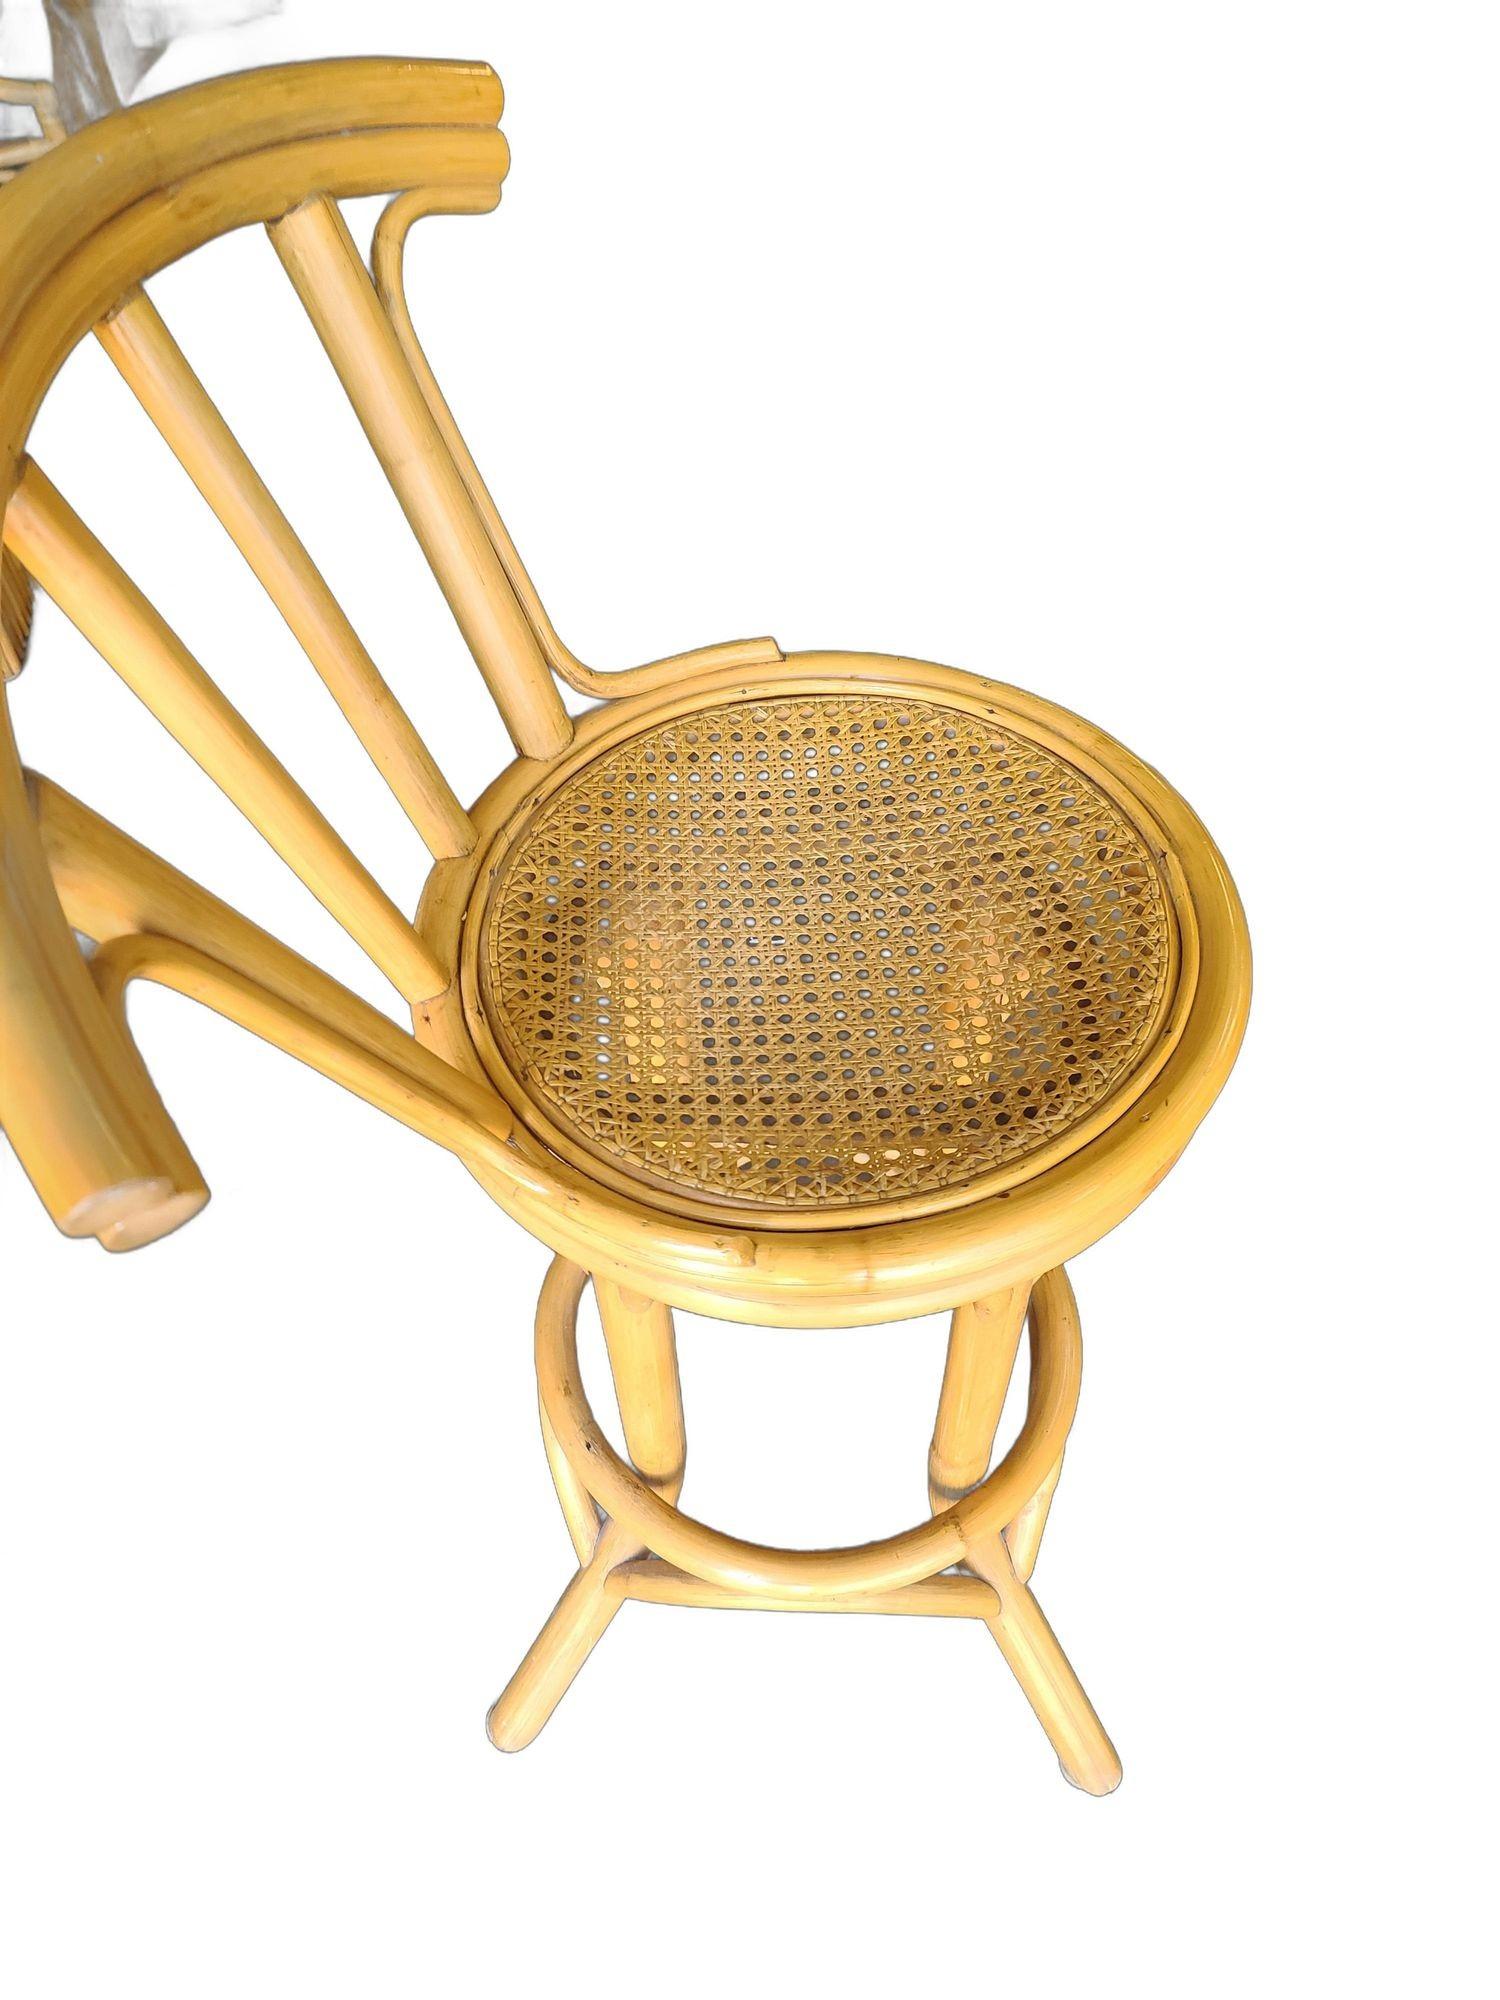 Mid-20th Century Mid Century Restored Rattan Bar Stool with Wicker Seat For Sale